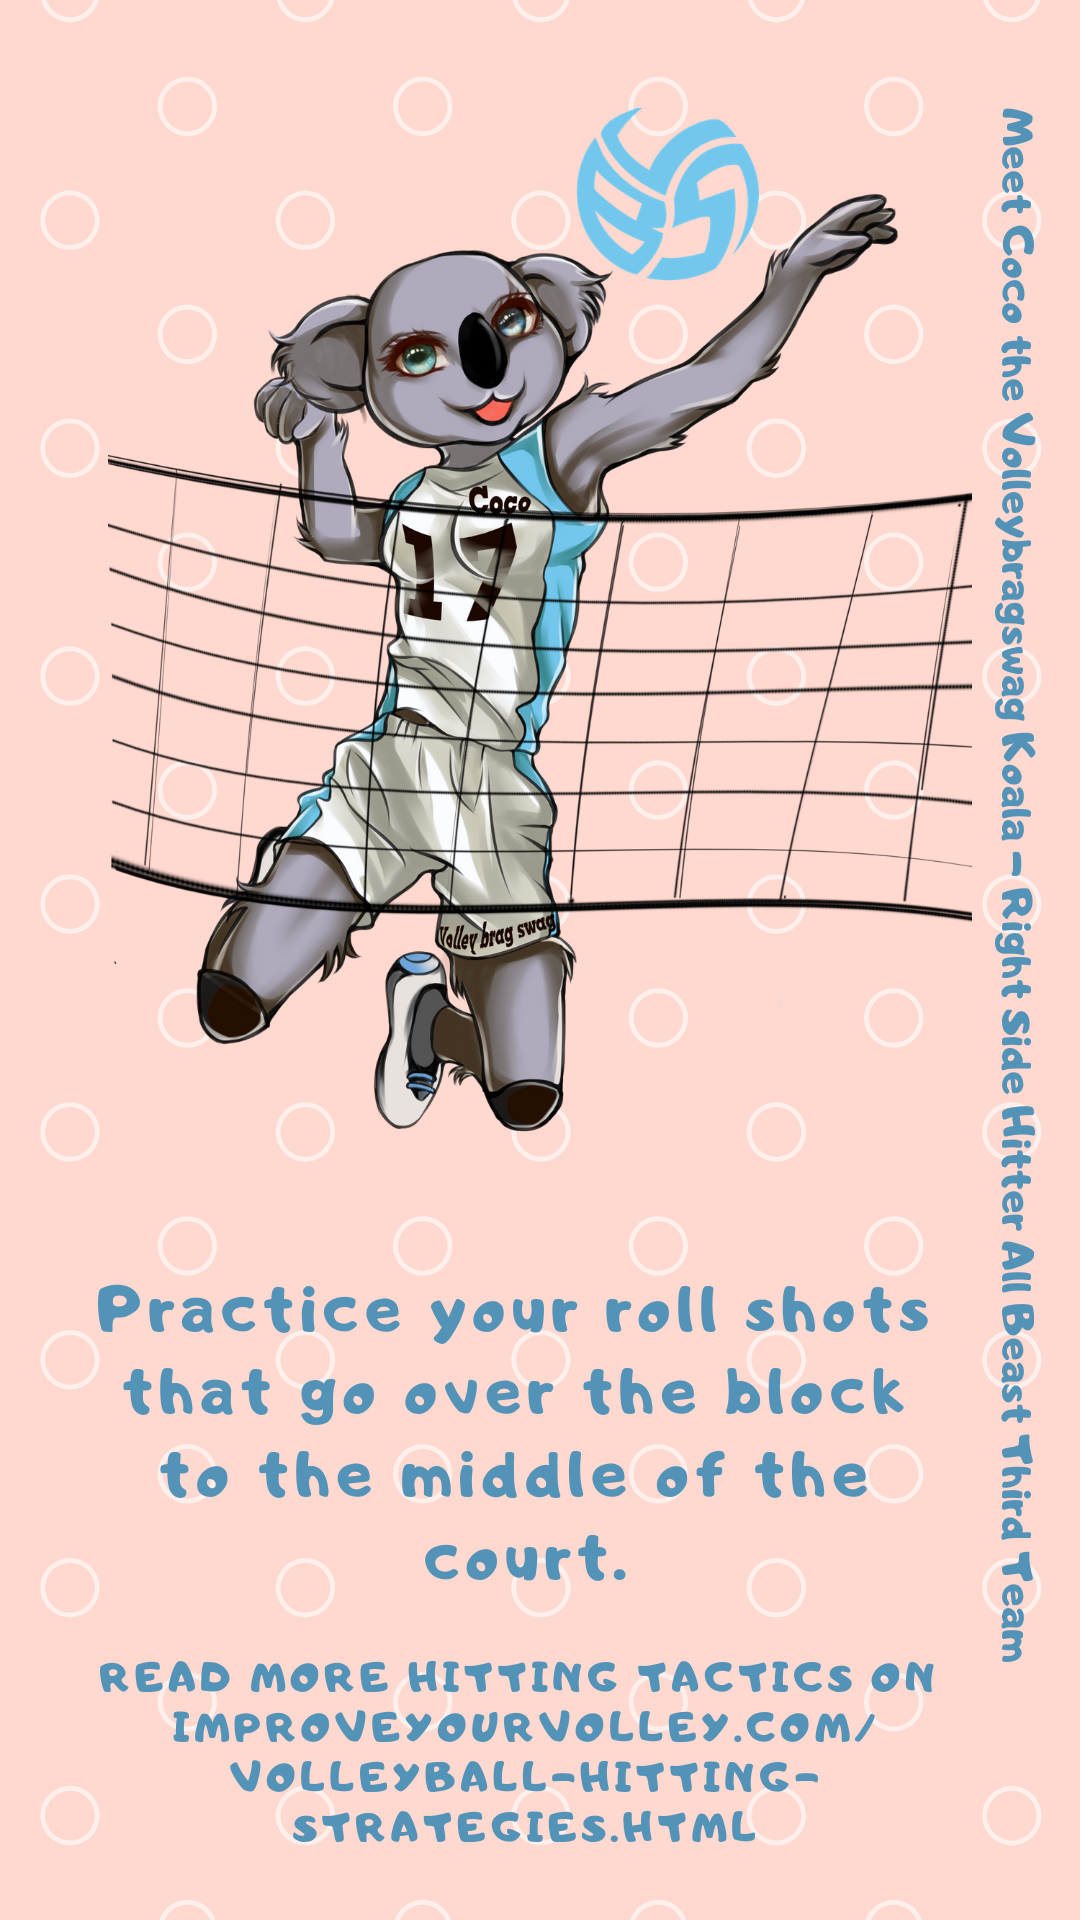 Hitting Tactics: Practice your roll shots that go over the block to the middle of the court.